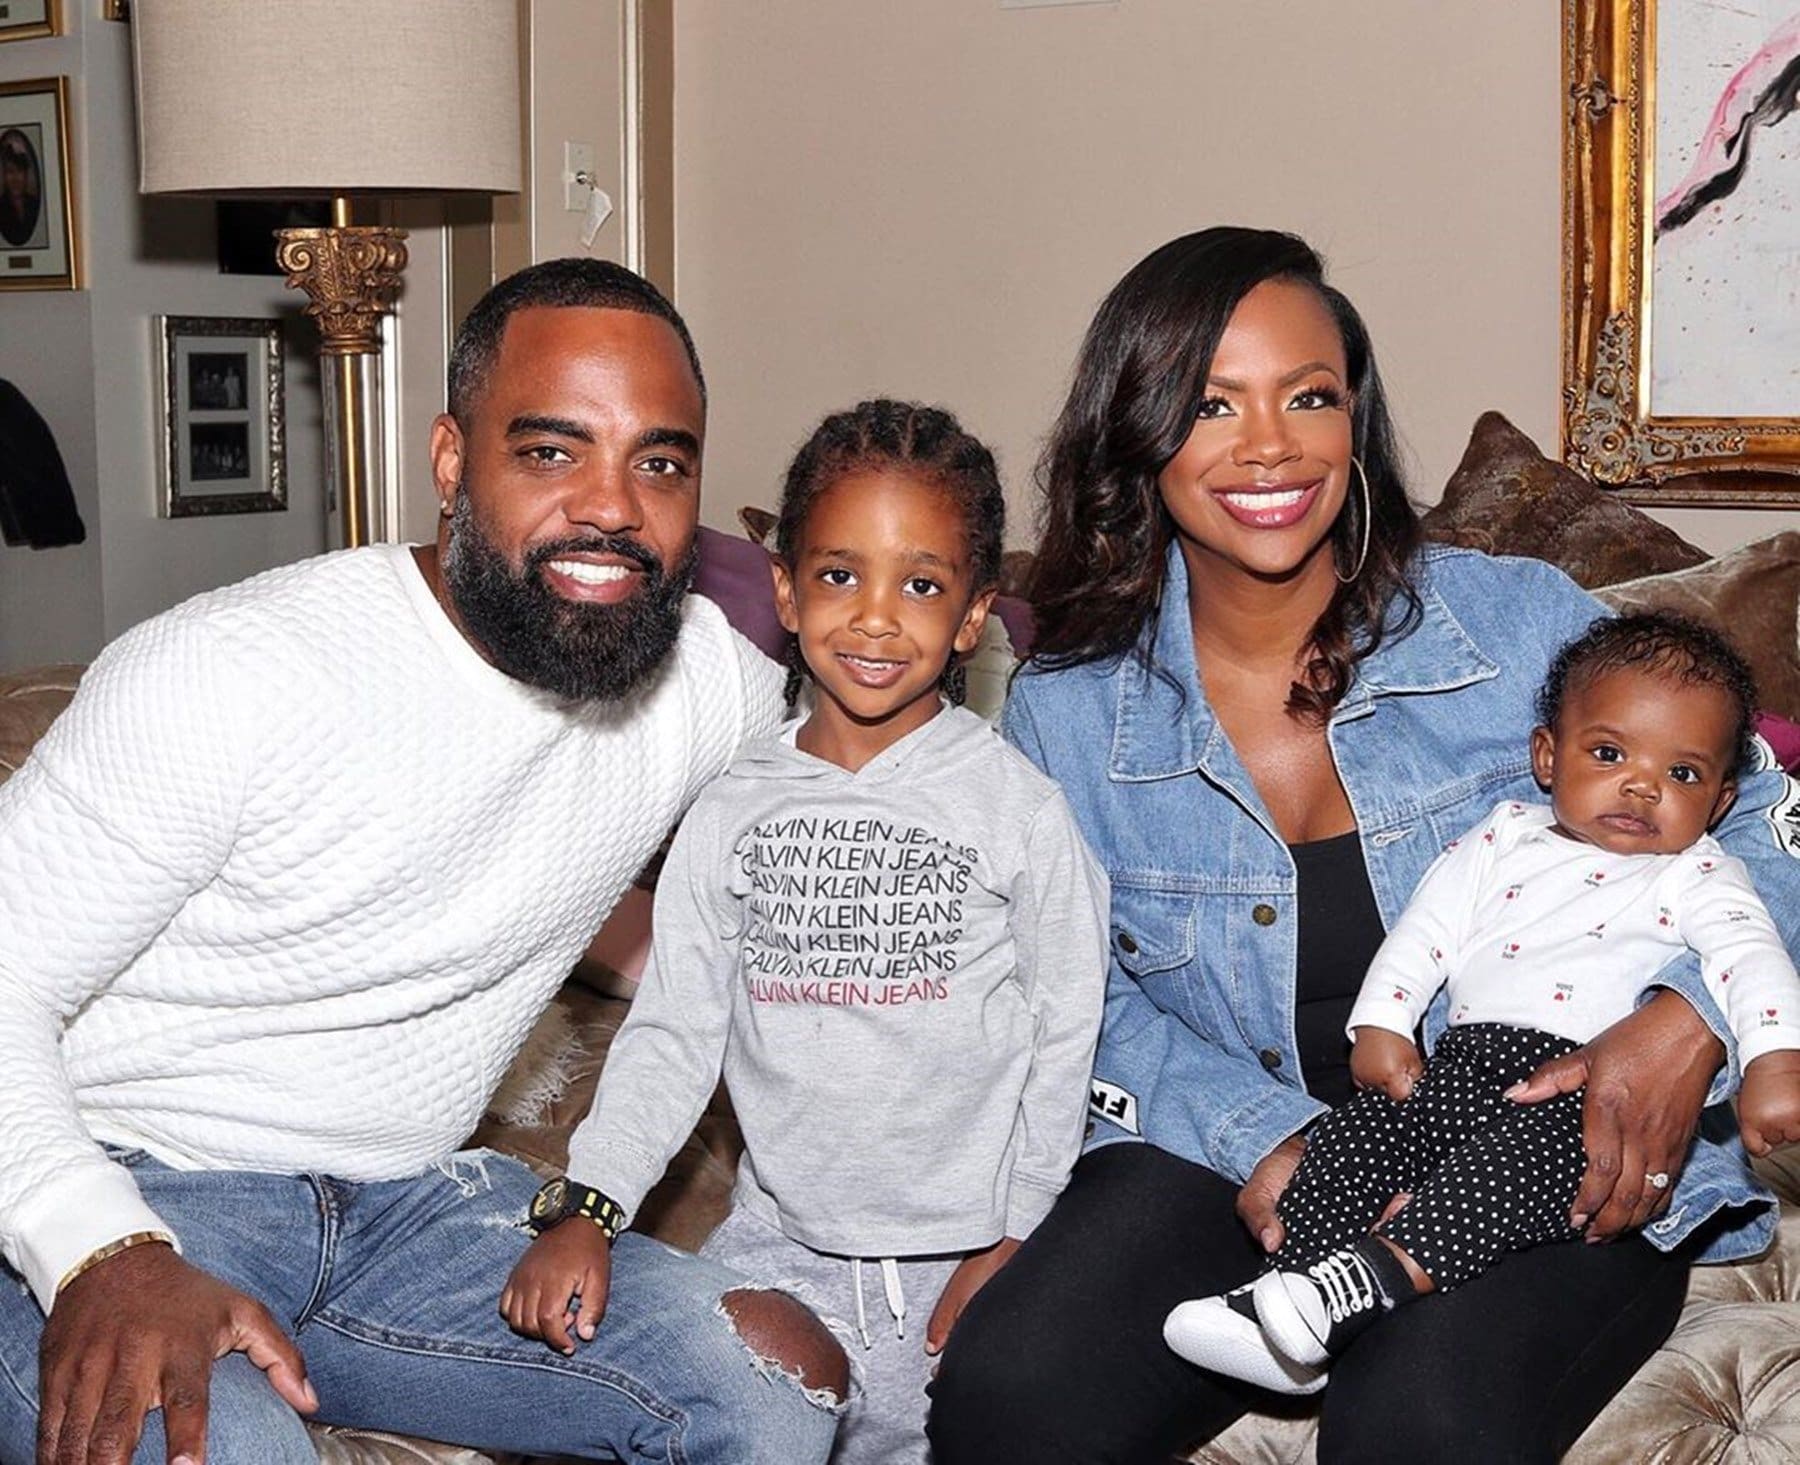 Kandi Burruss' Latest Family Photo Makes Fans Happy - See Baby Blaze Twinning With Her Mom